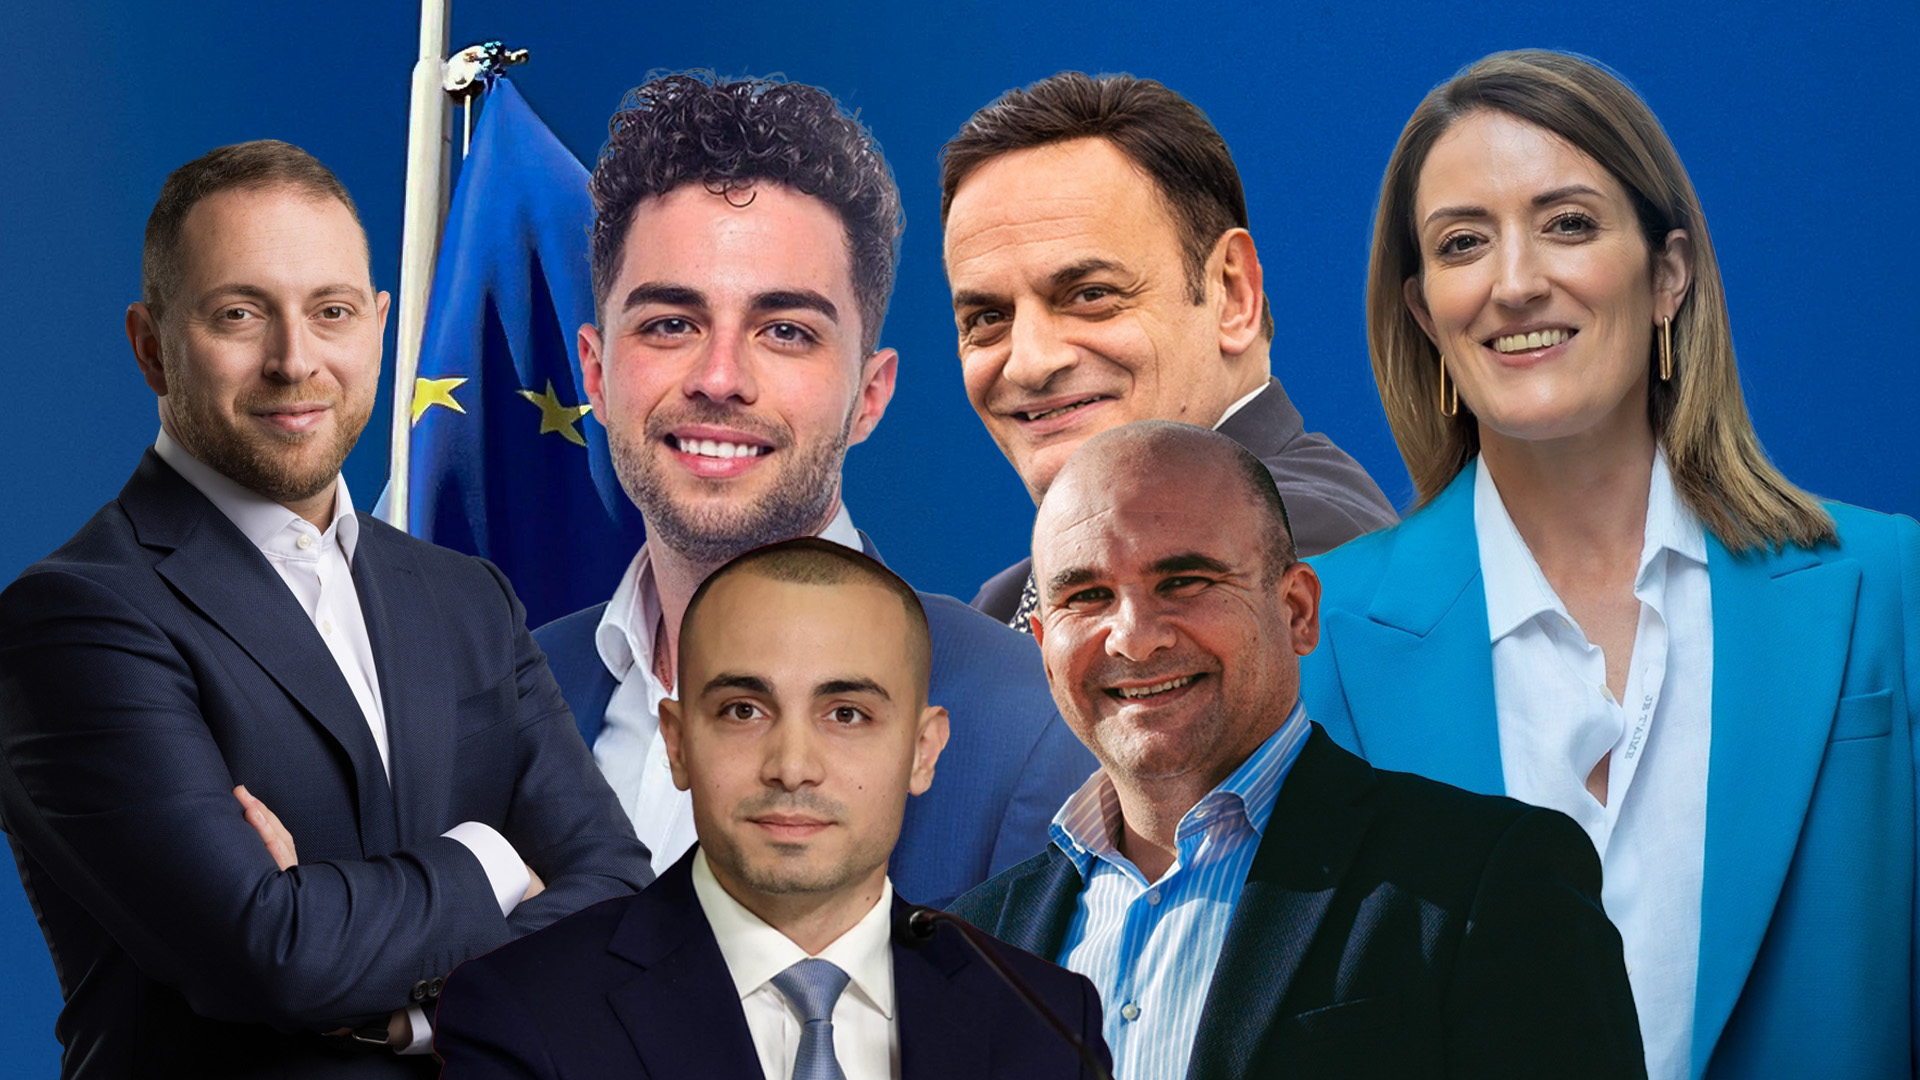 PN & PL Elect 3 MEPs Each, Results Show